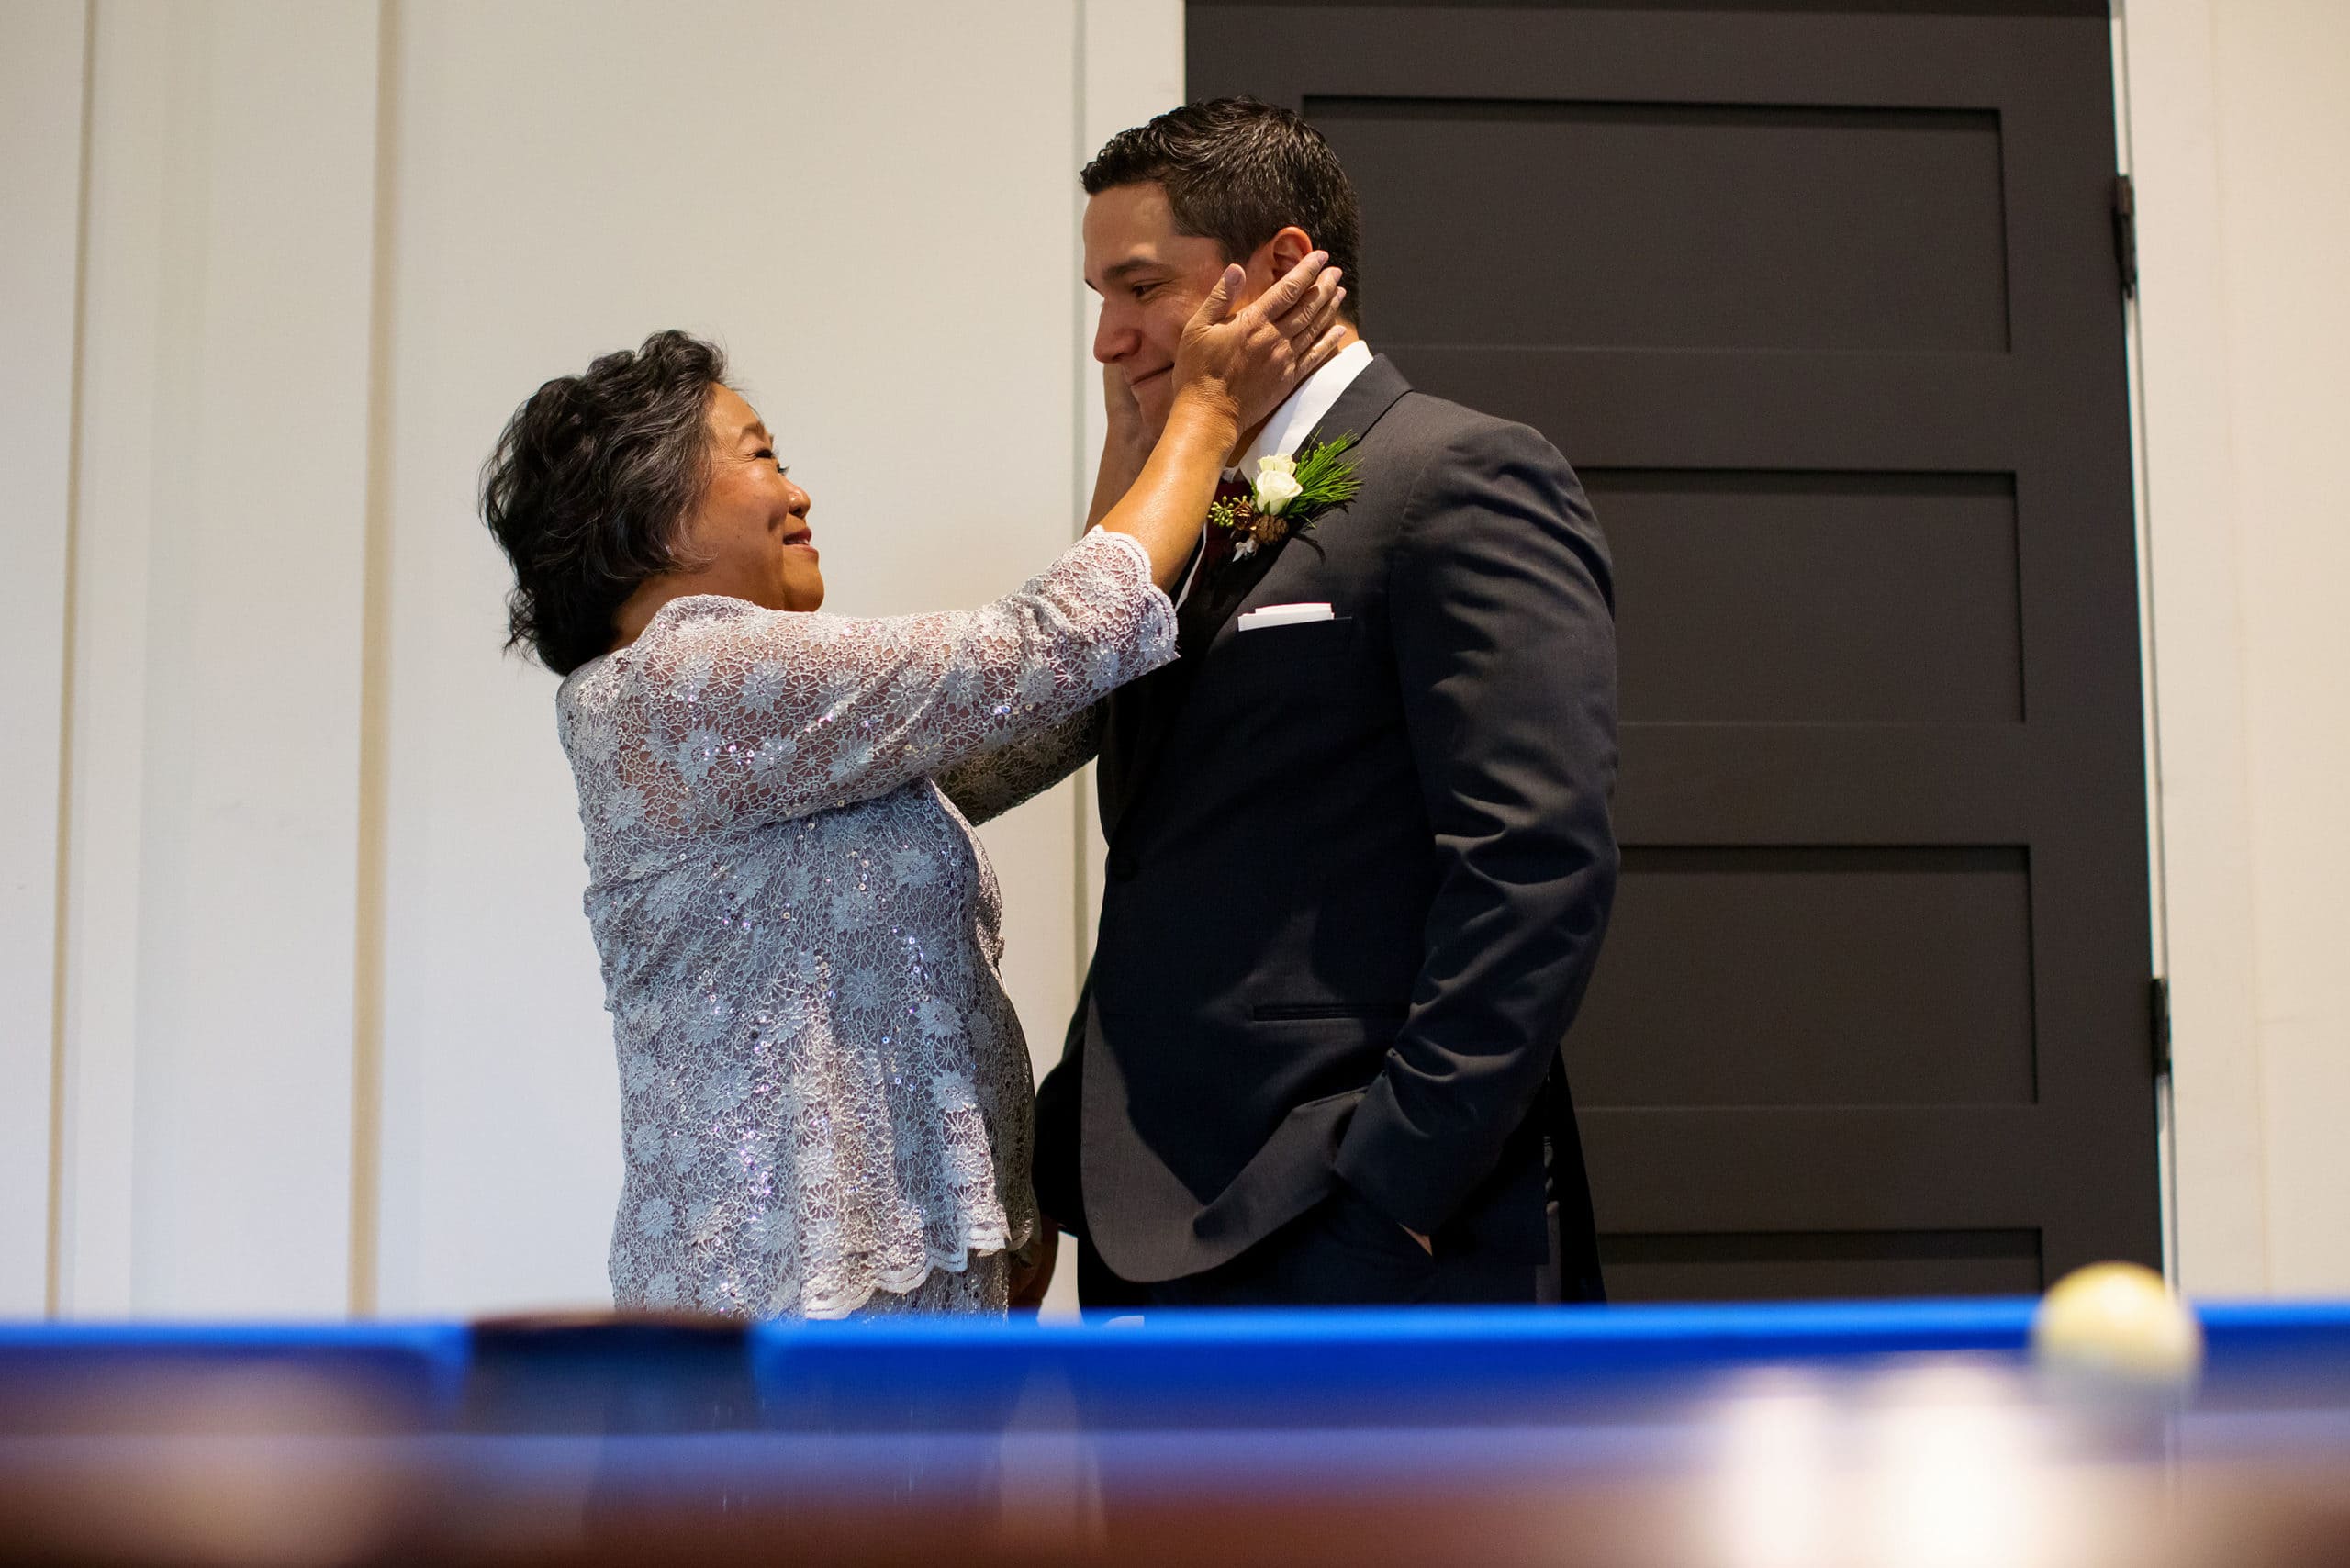 The mother of the groom embraces her son